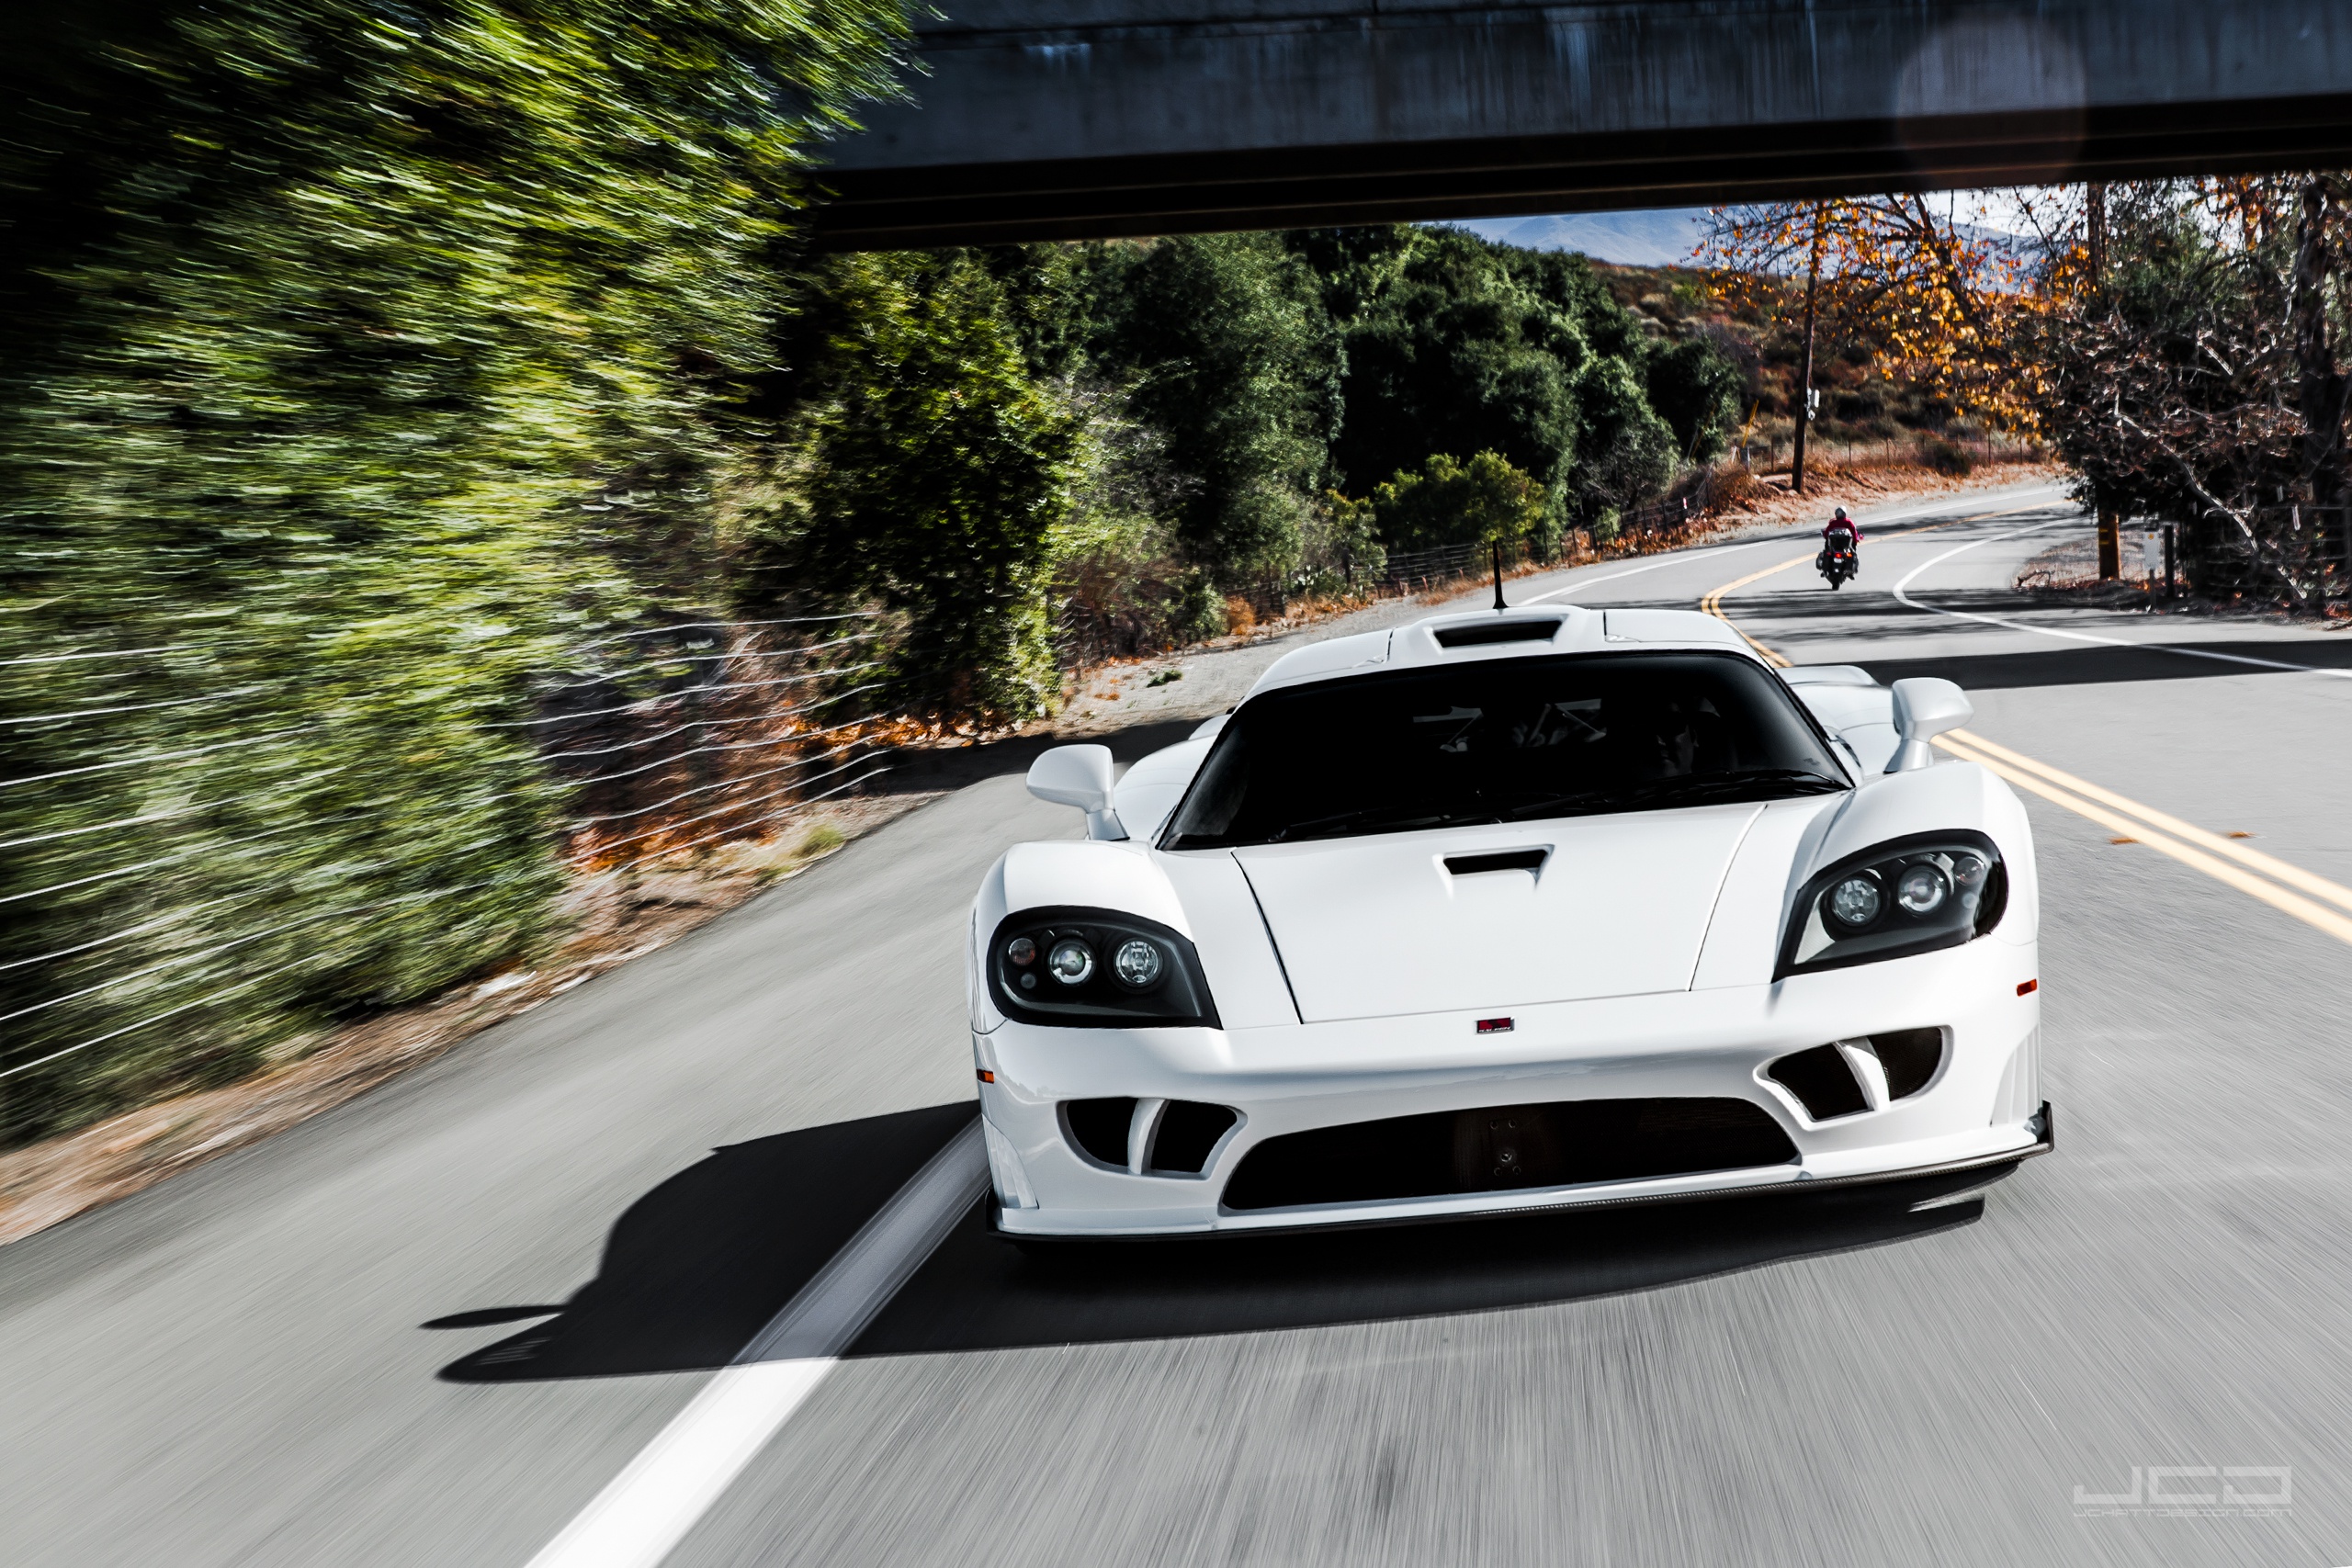 2008 Saleen S302 Extreme #232618 - Best quality free high resolution car  images - mad4wheels